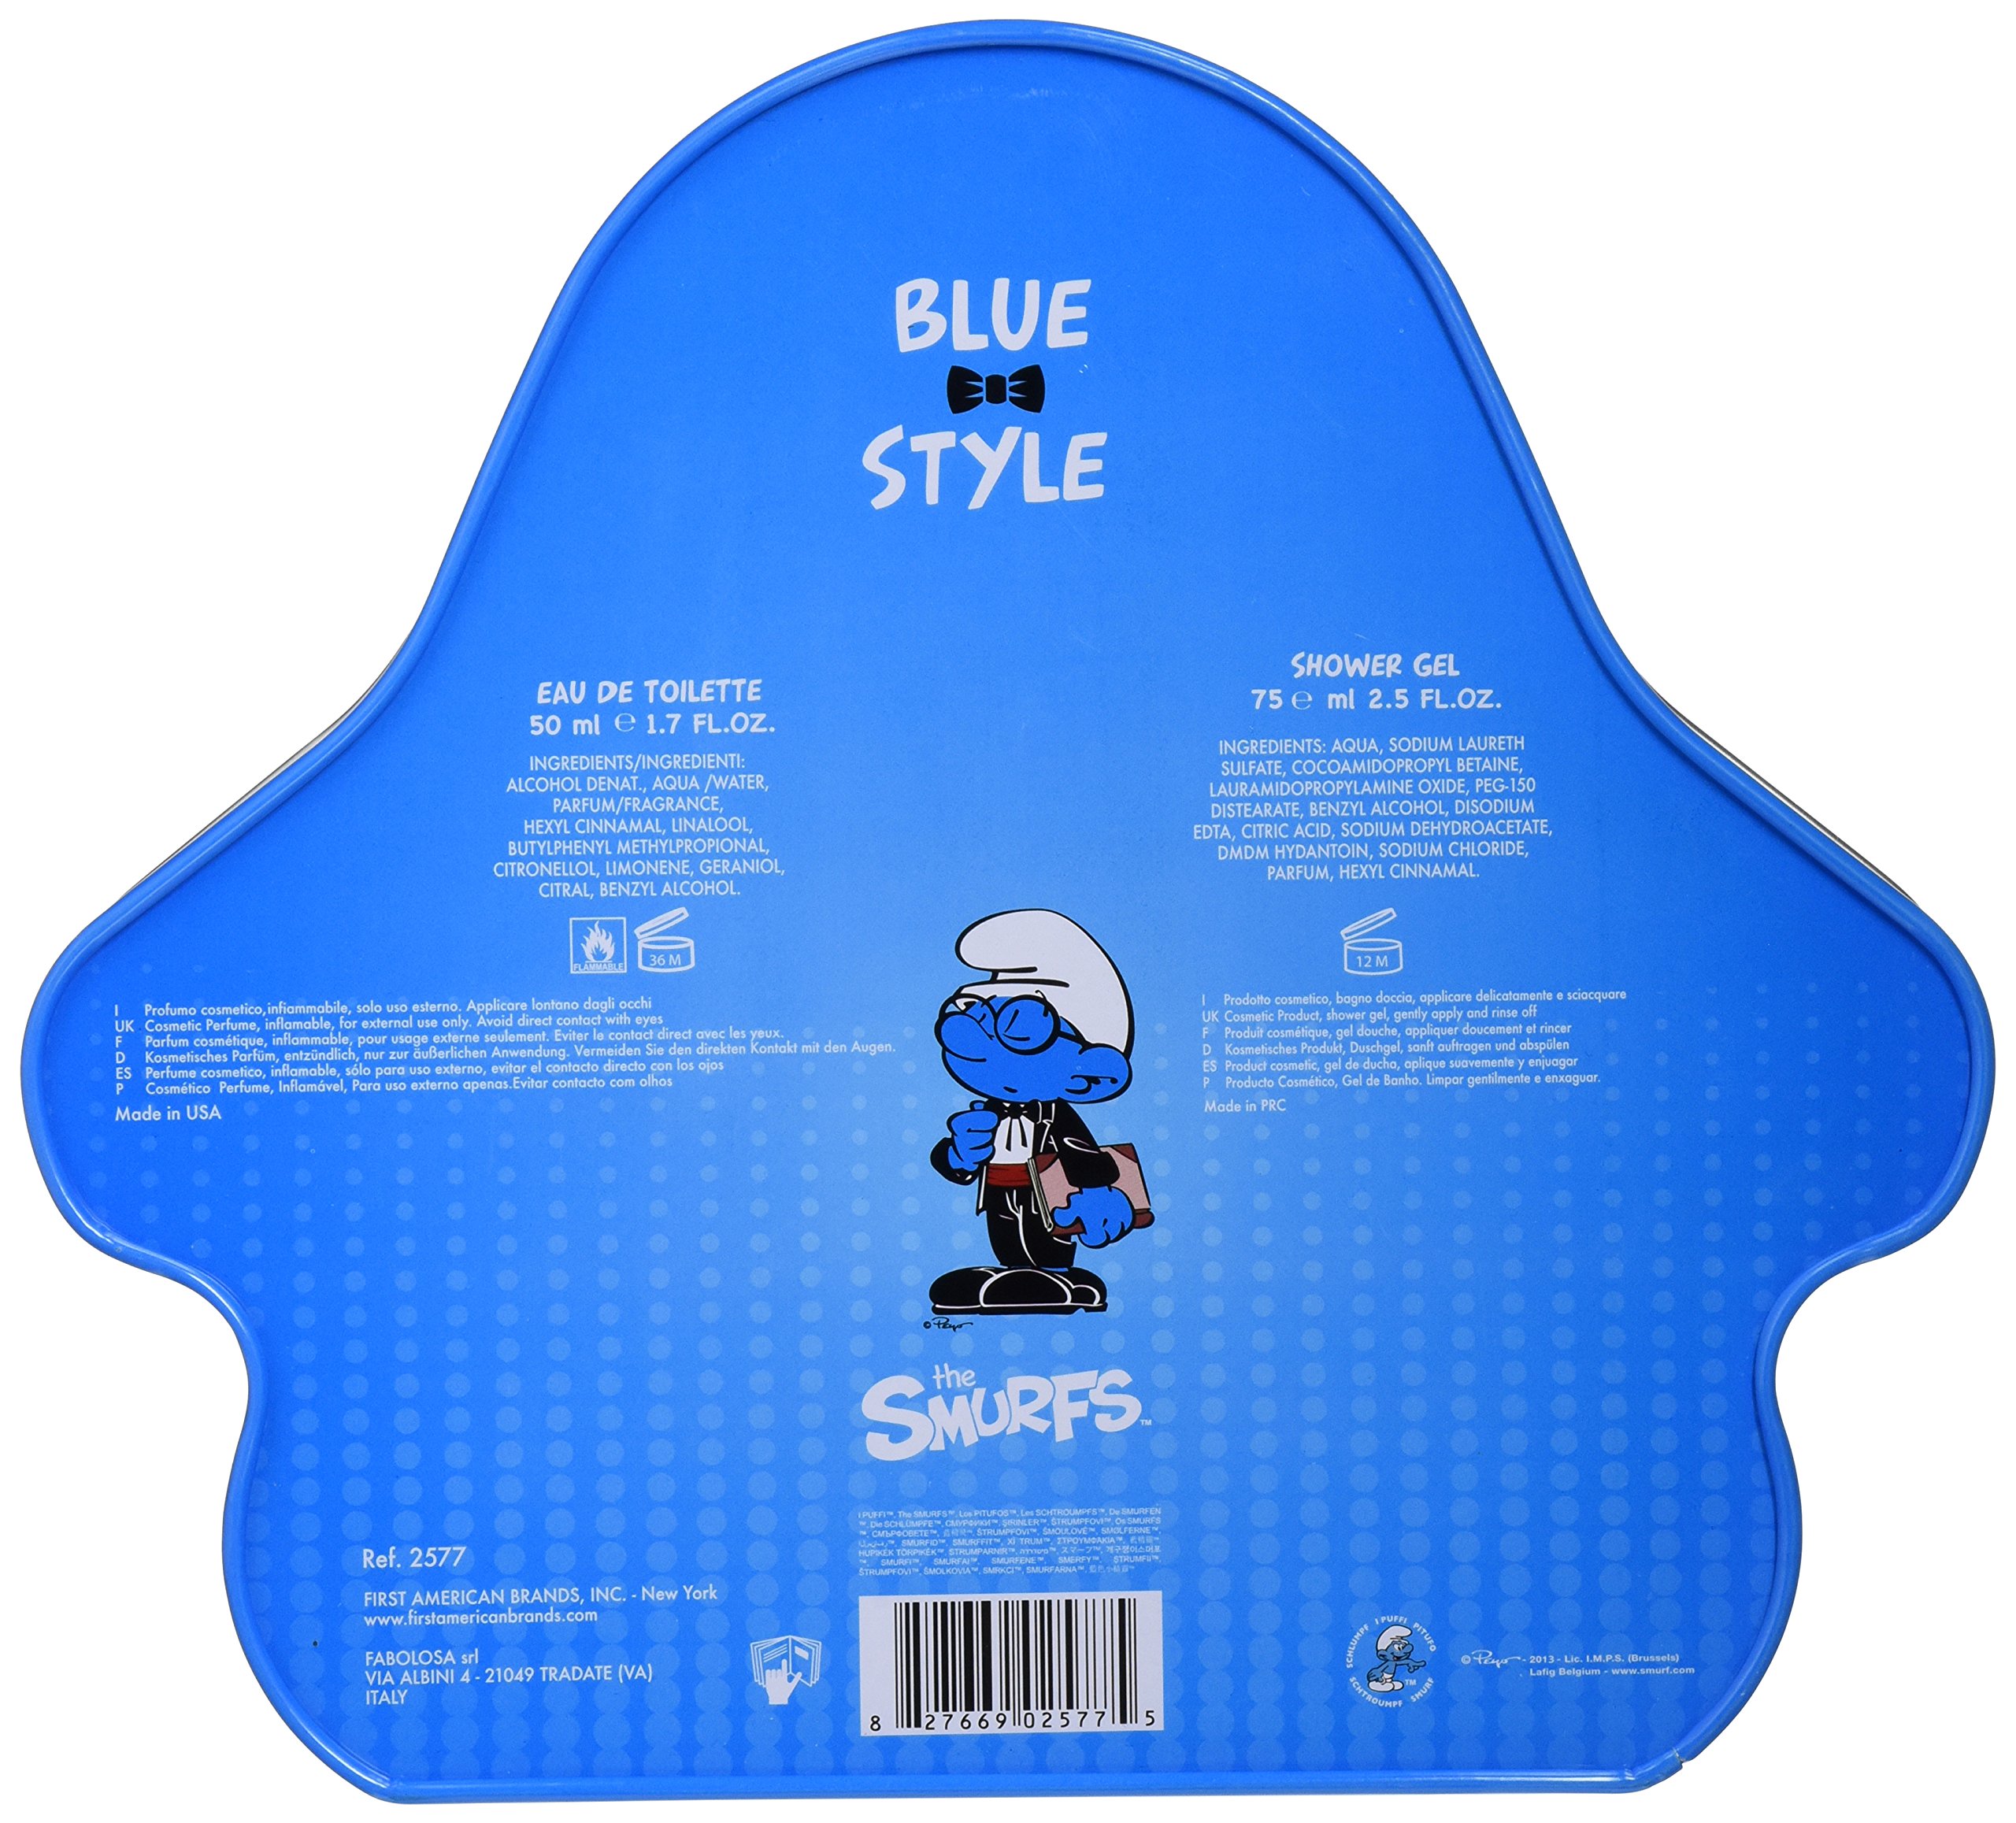 First American Brands The Smurfs Blue Style Brainy 2 Pc Gift Set